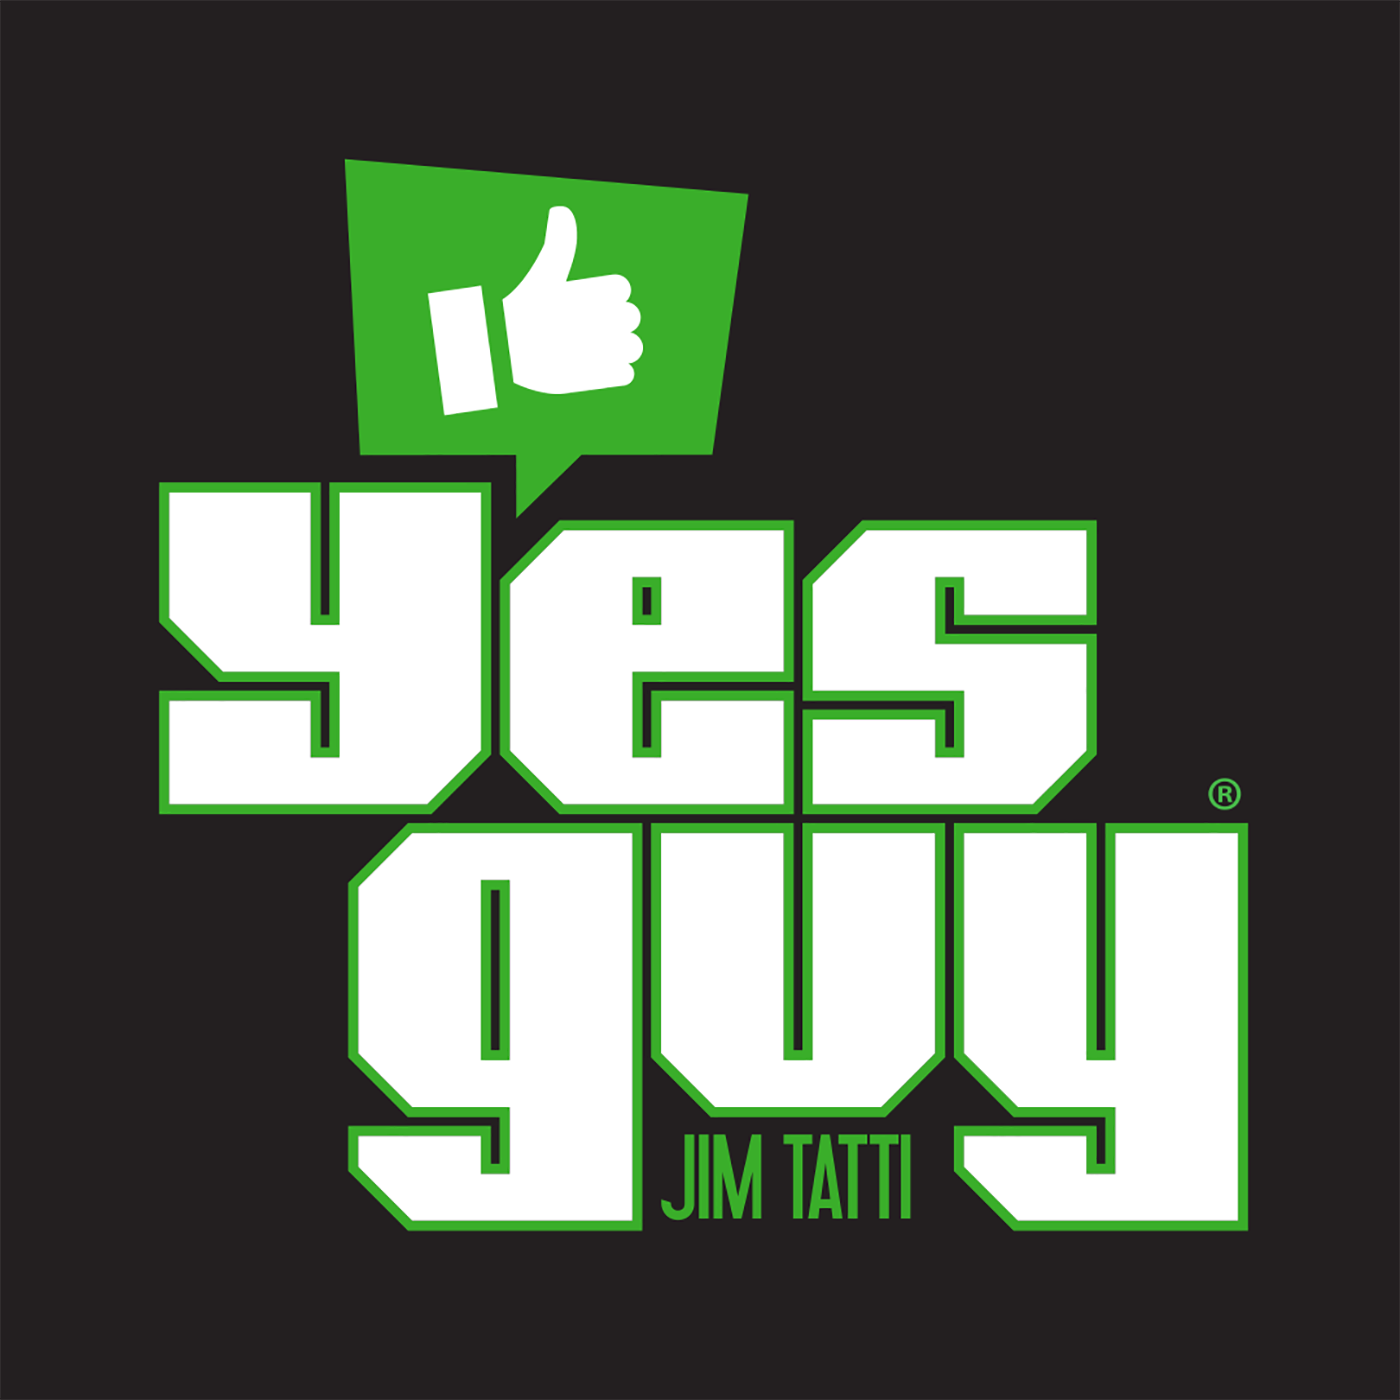 Yes Guy - March 7 - Episode 185